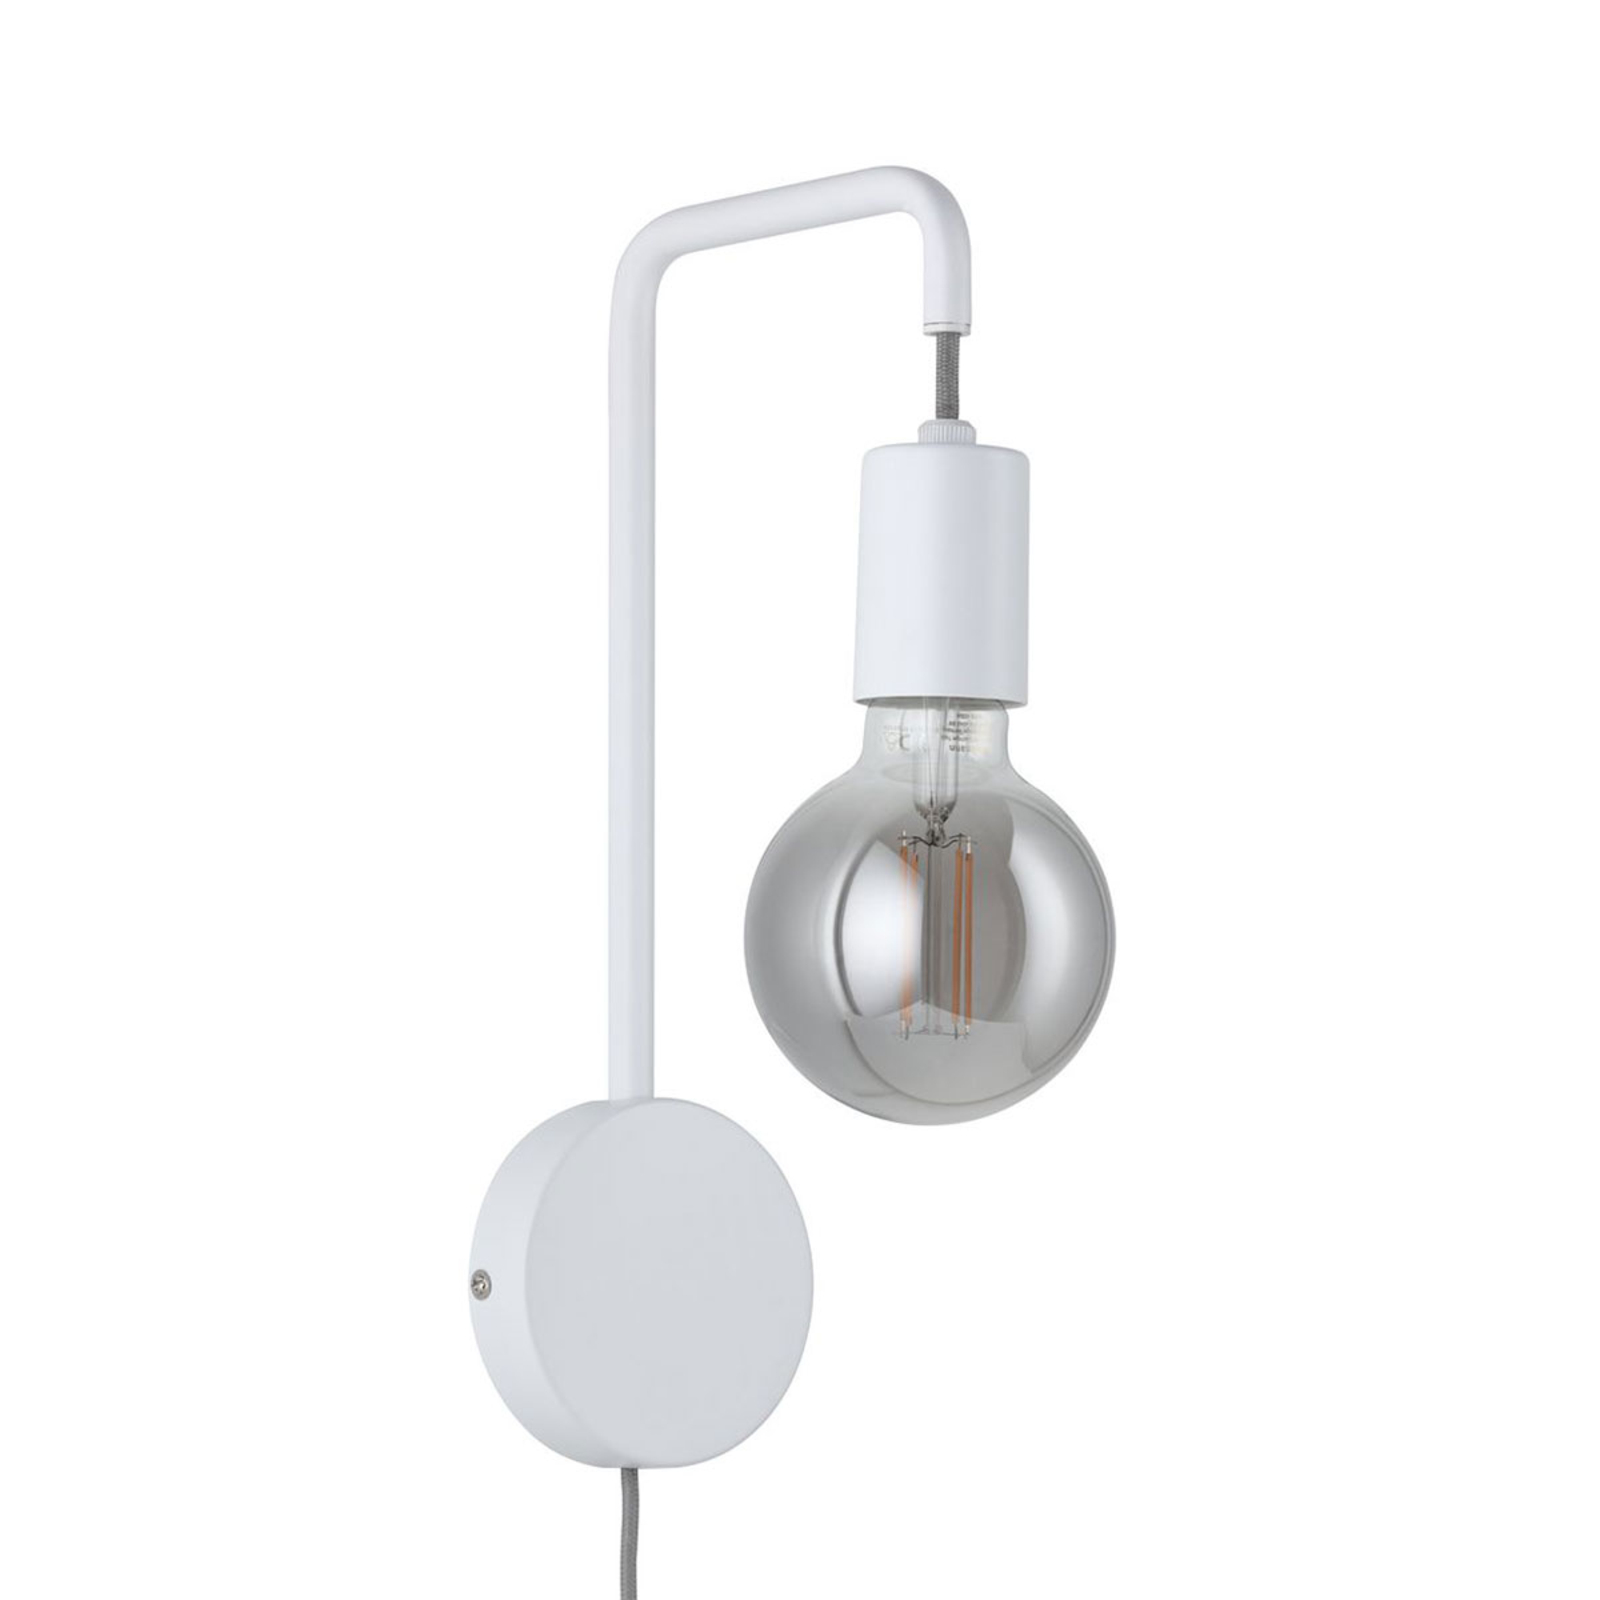 Paulmann Calvani wall light with cable and switch